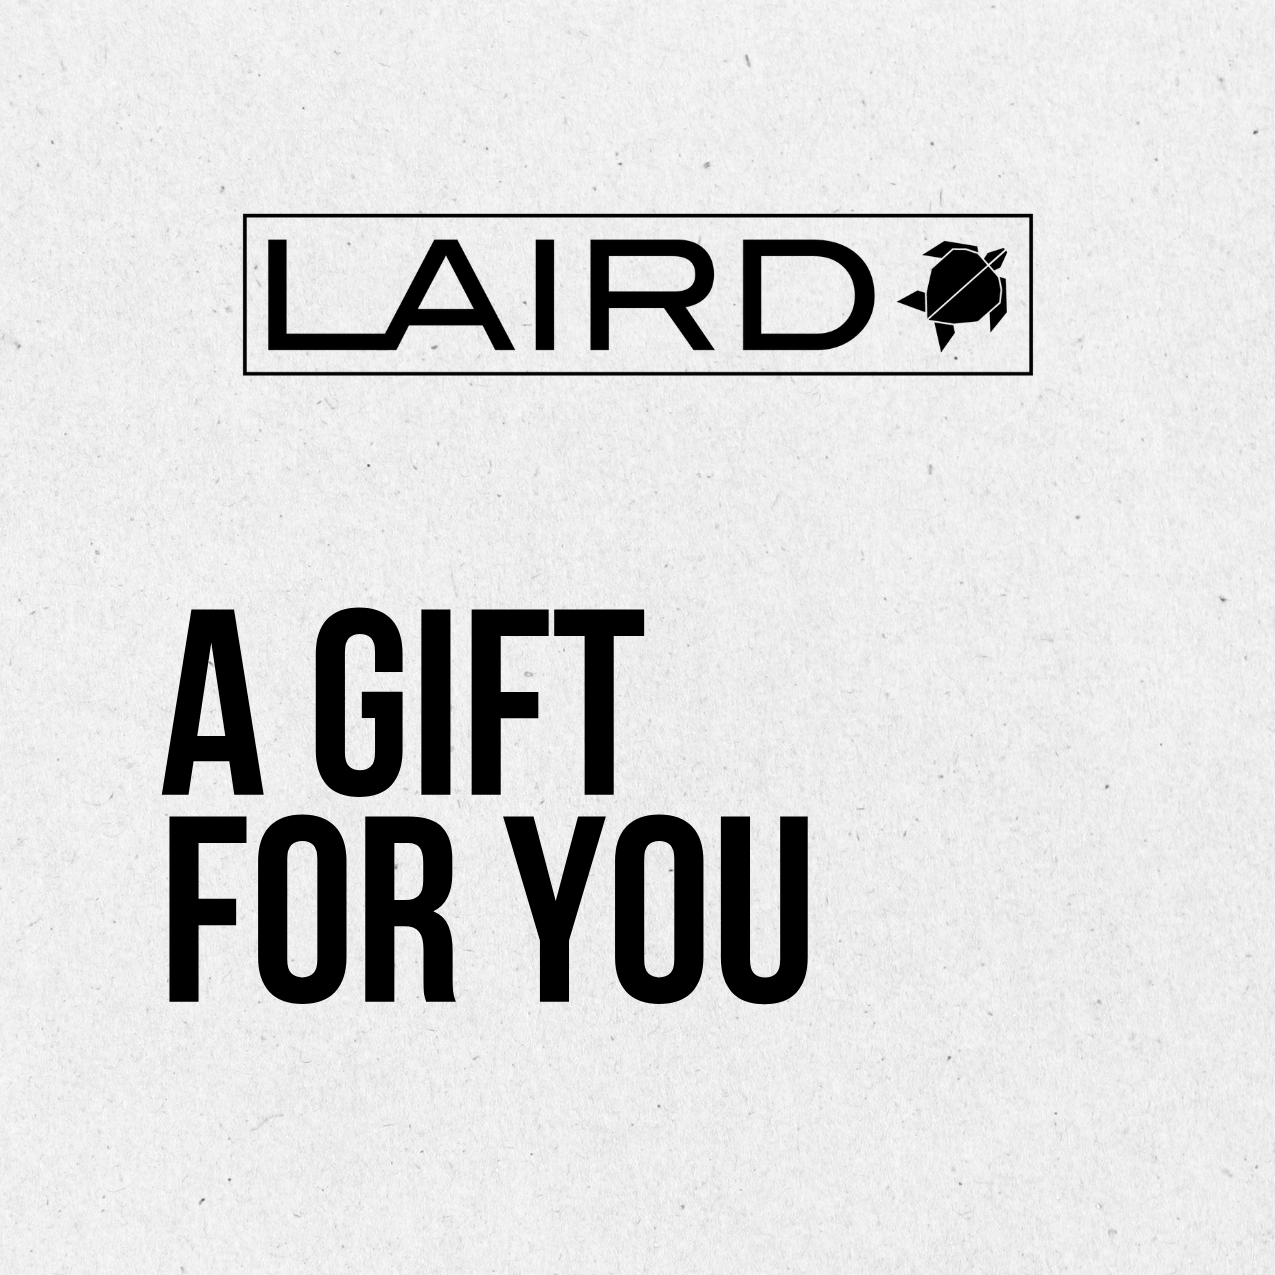 LAIRD Gift Card